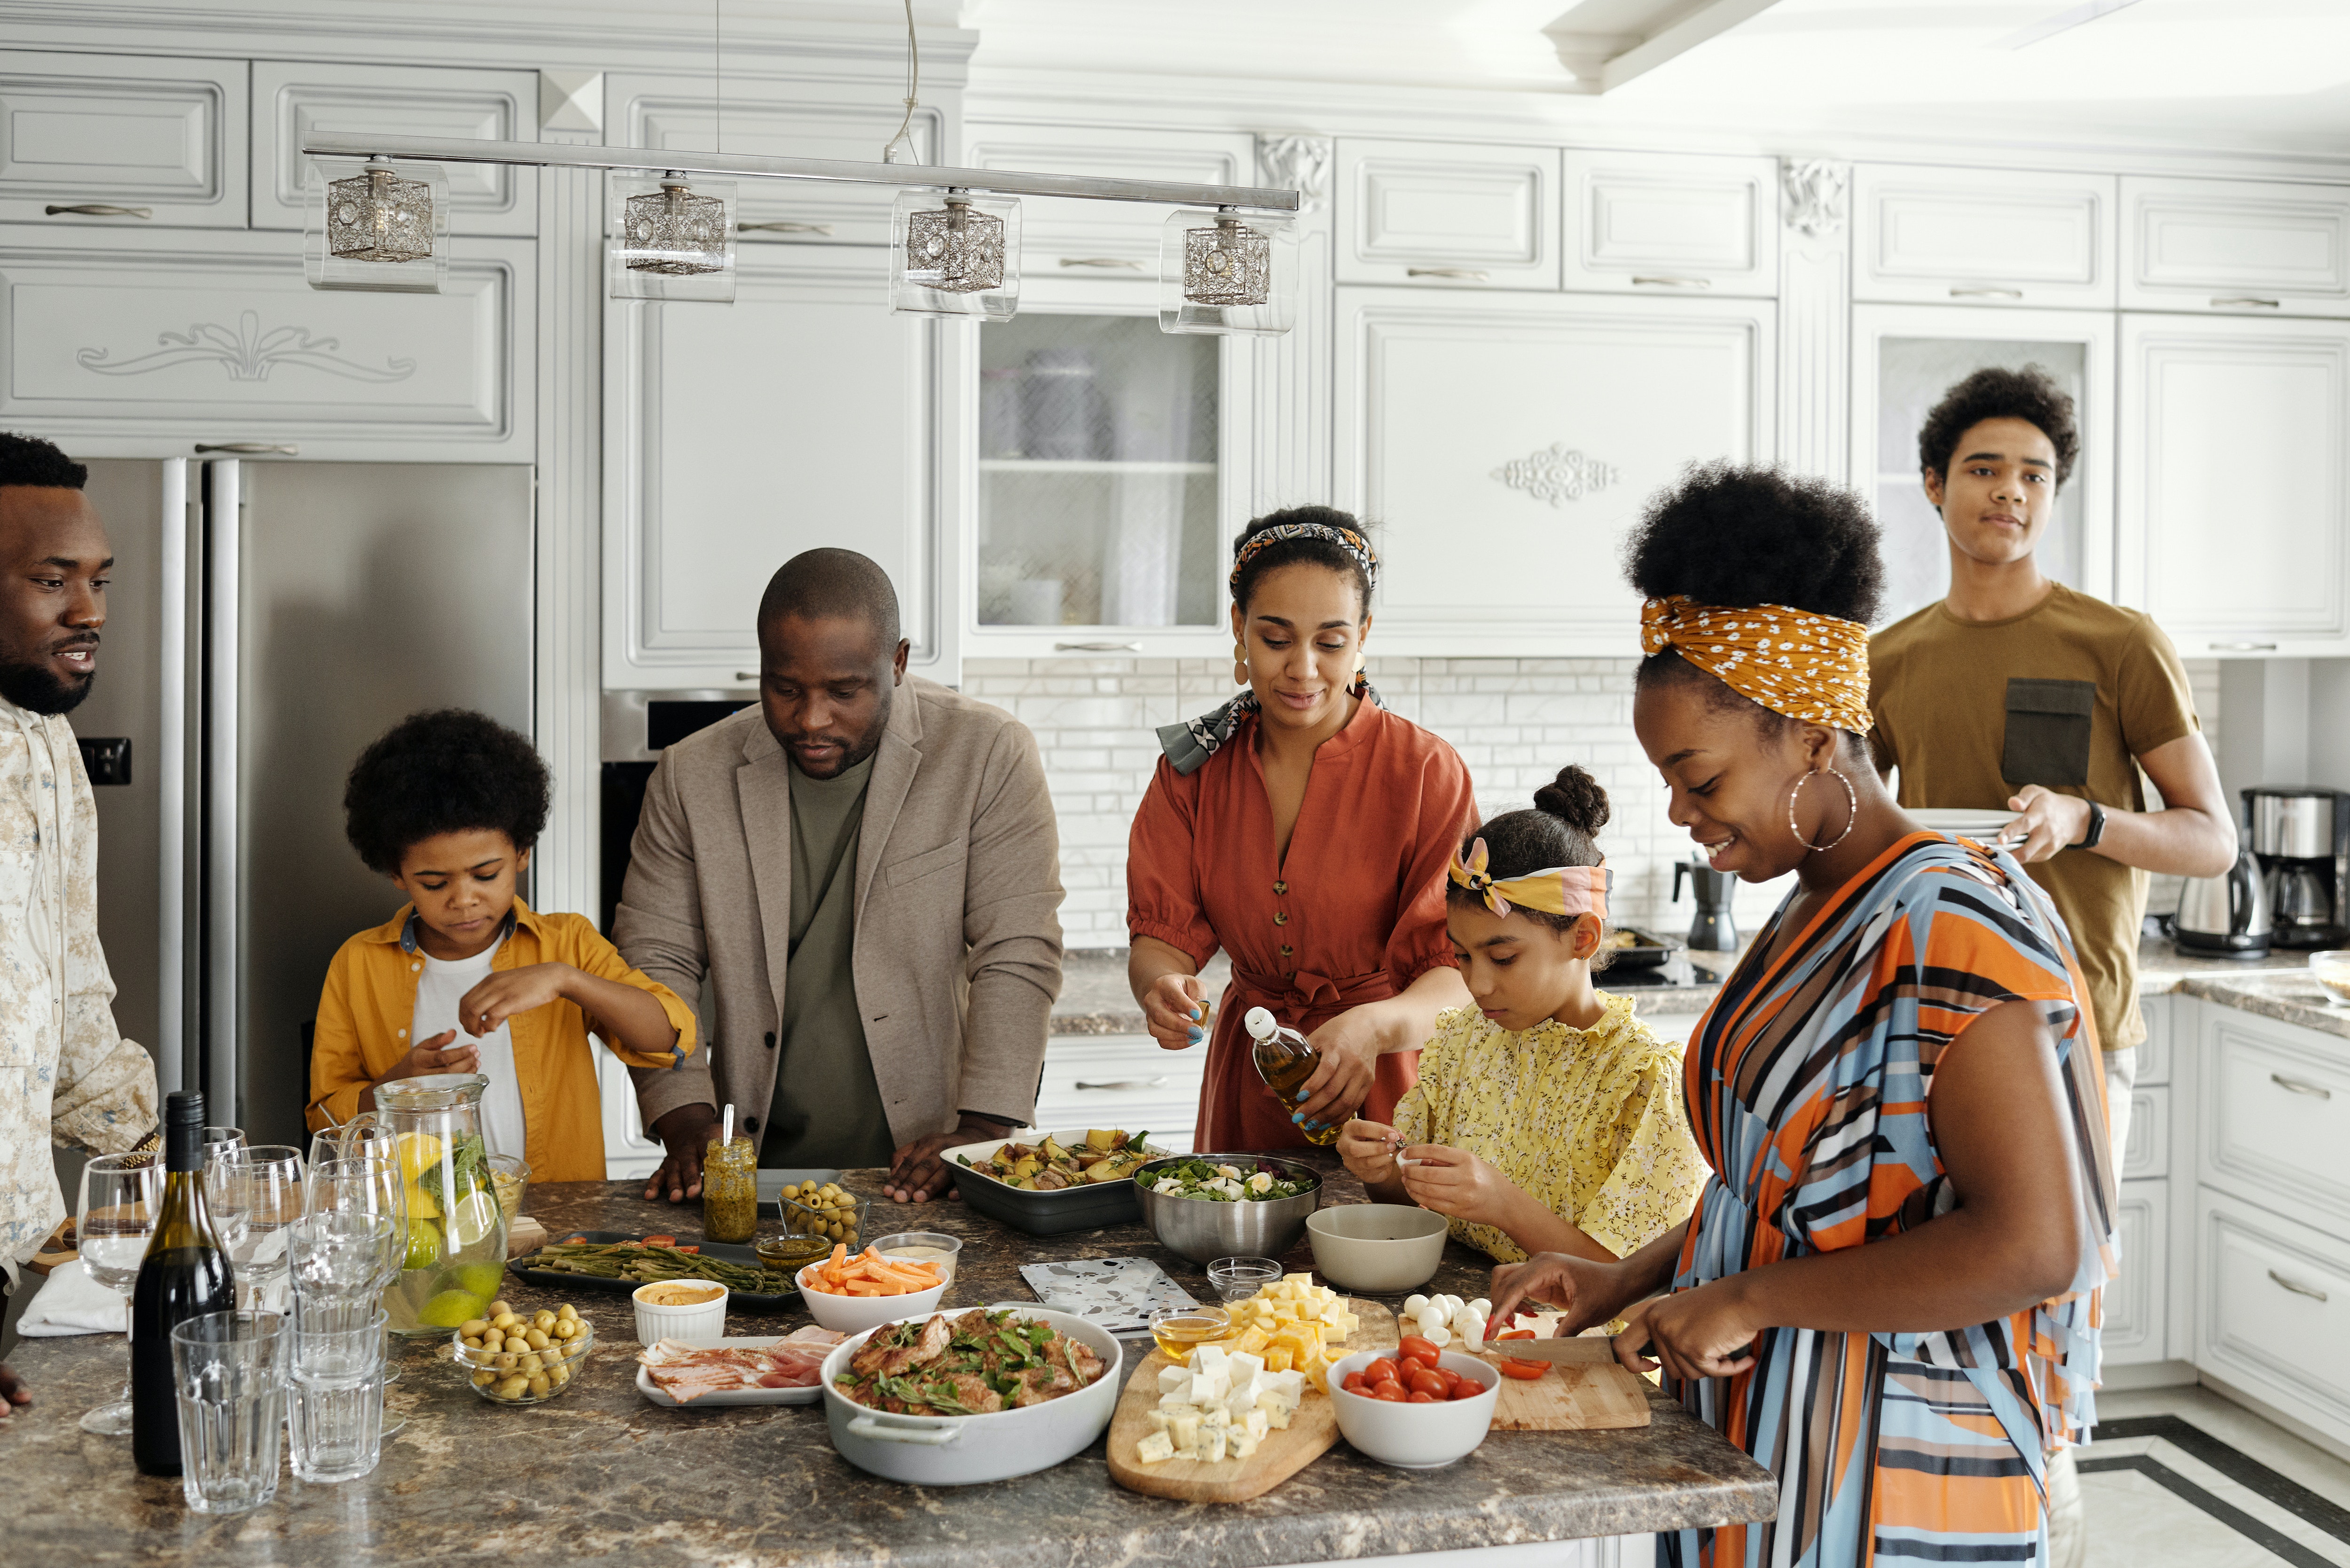 big family gathered around a countertop with an array of delicious-looking food spread out in front of them